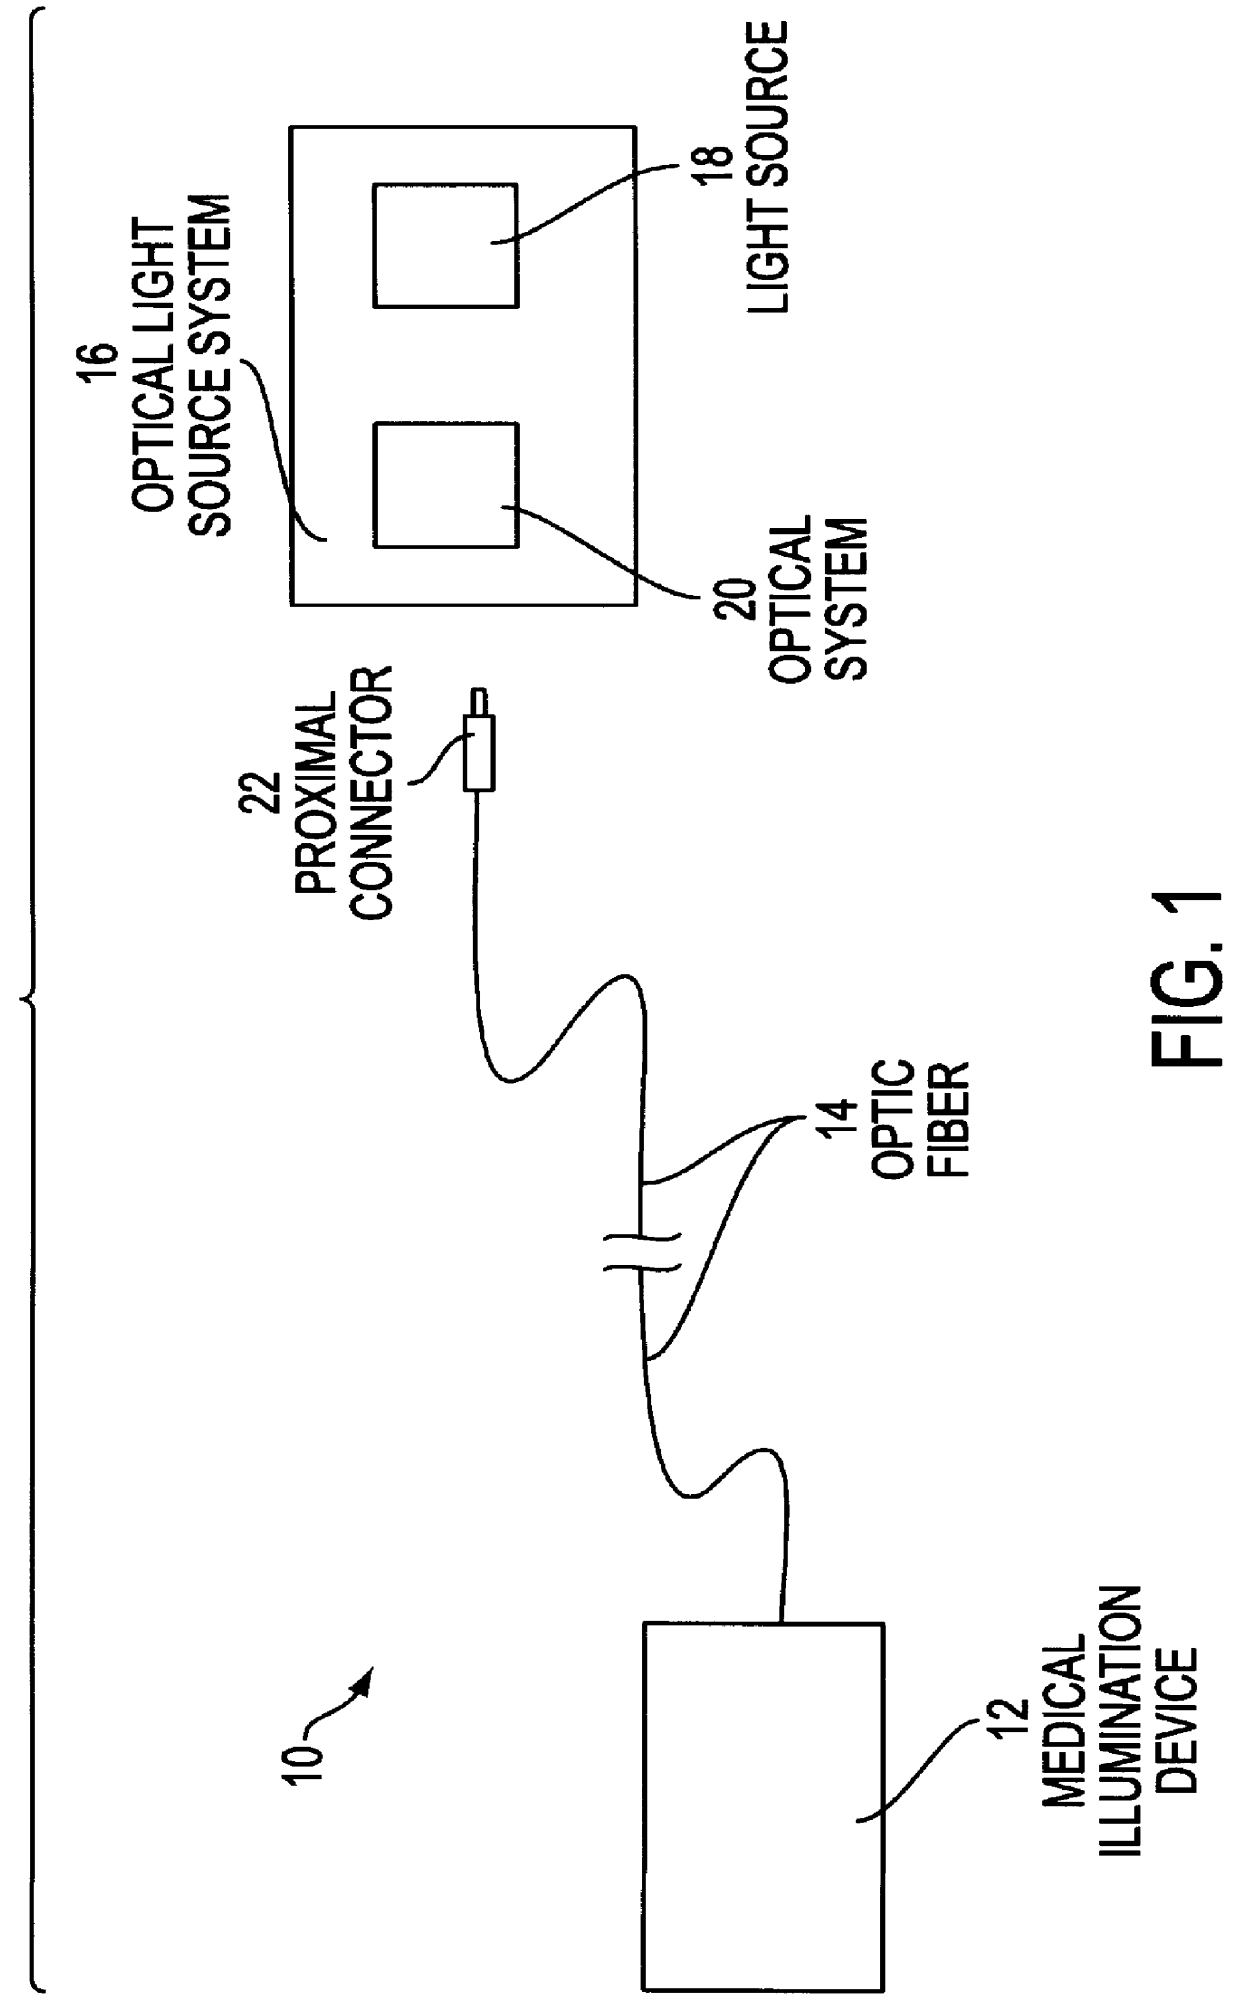 Snap-in proximal connector for mounting an optic fiber element into a light source system